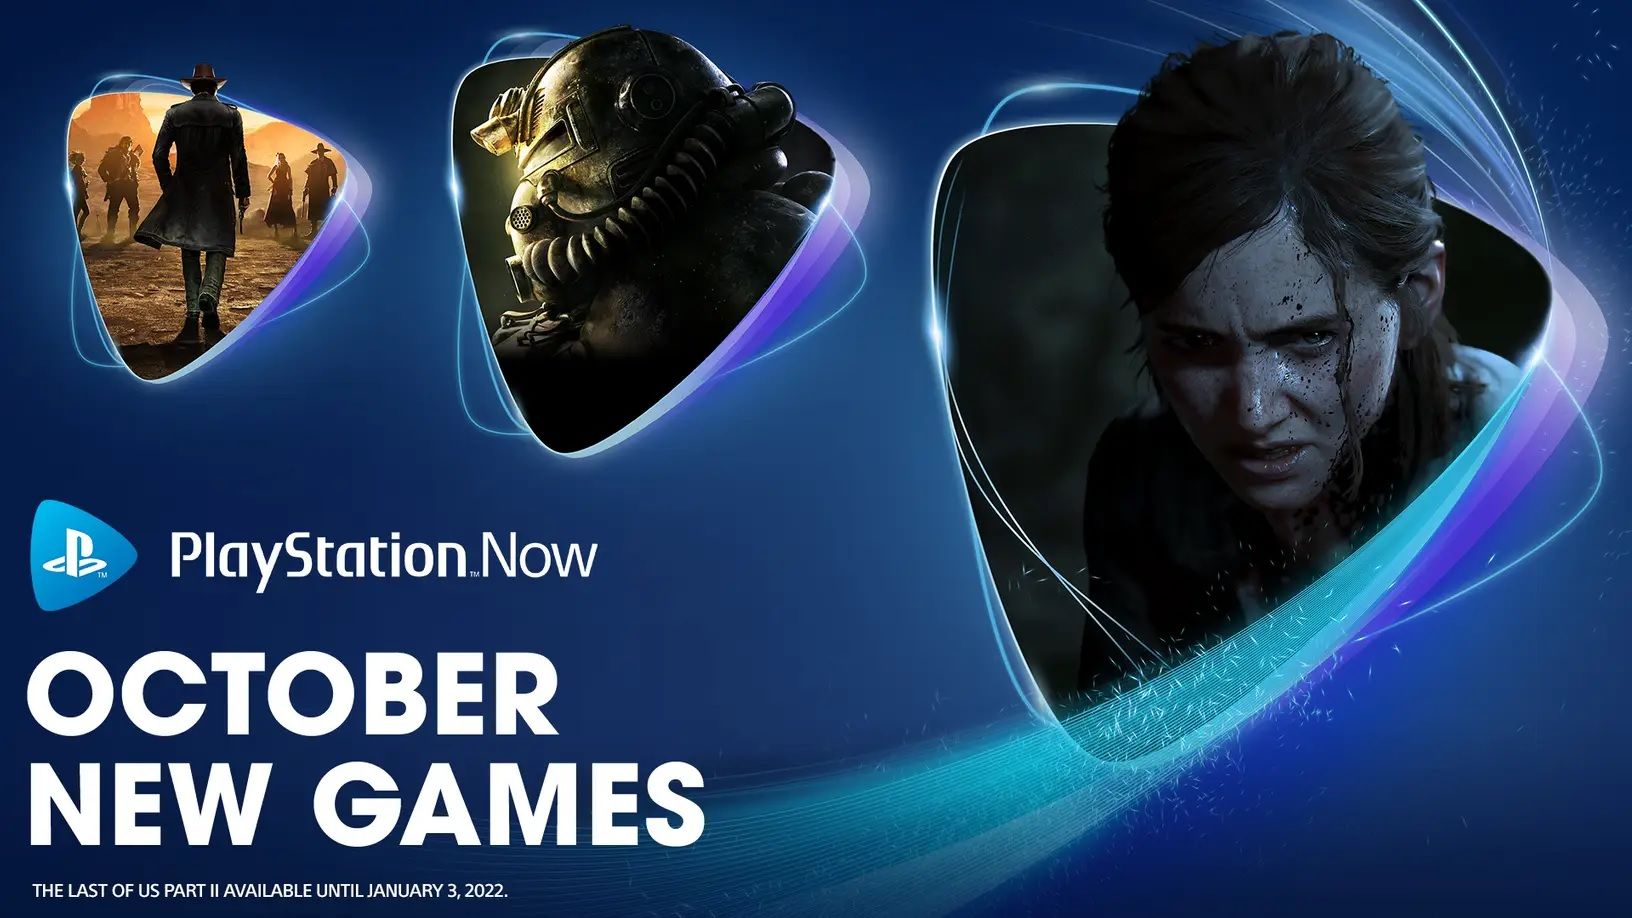 PlayStation Now Confirms 7 New Games for October